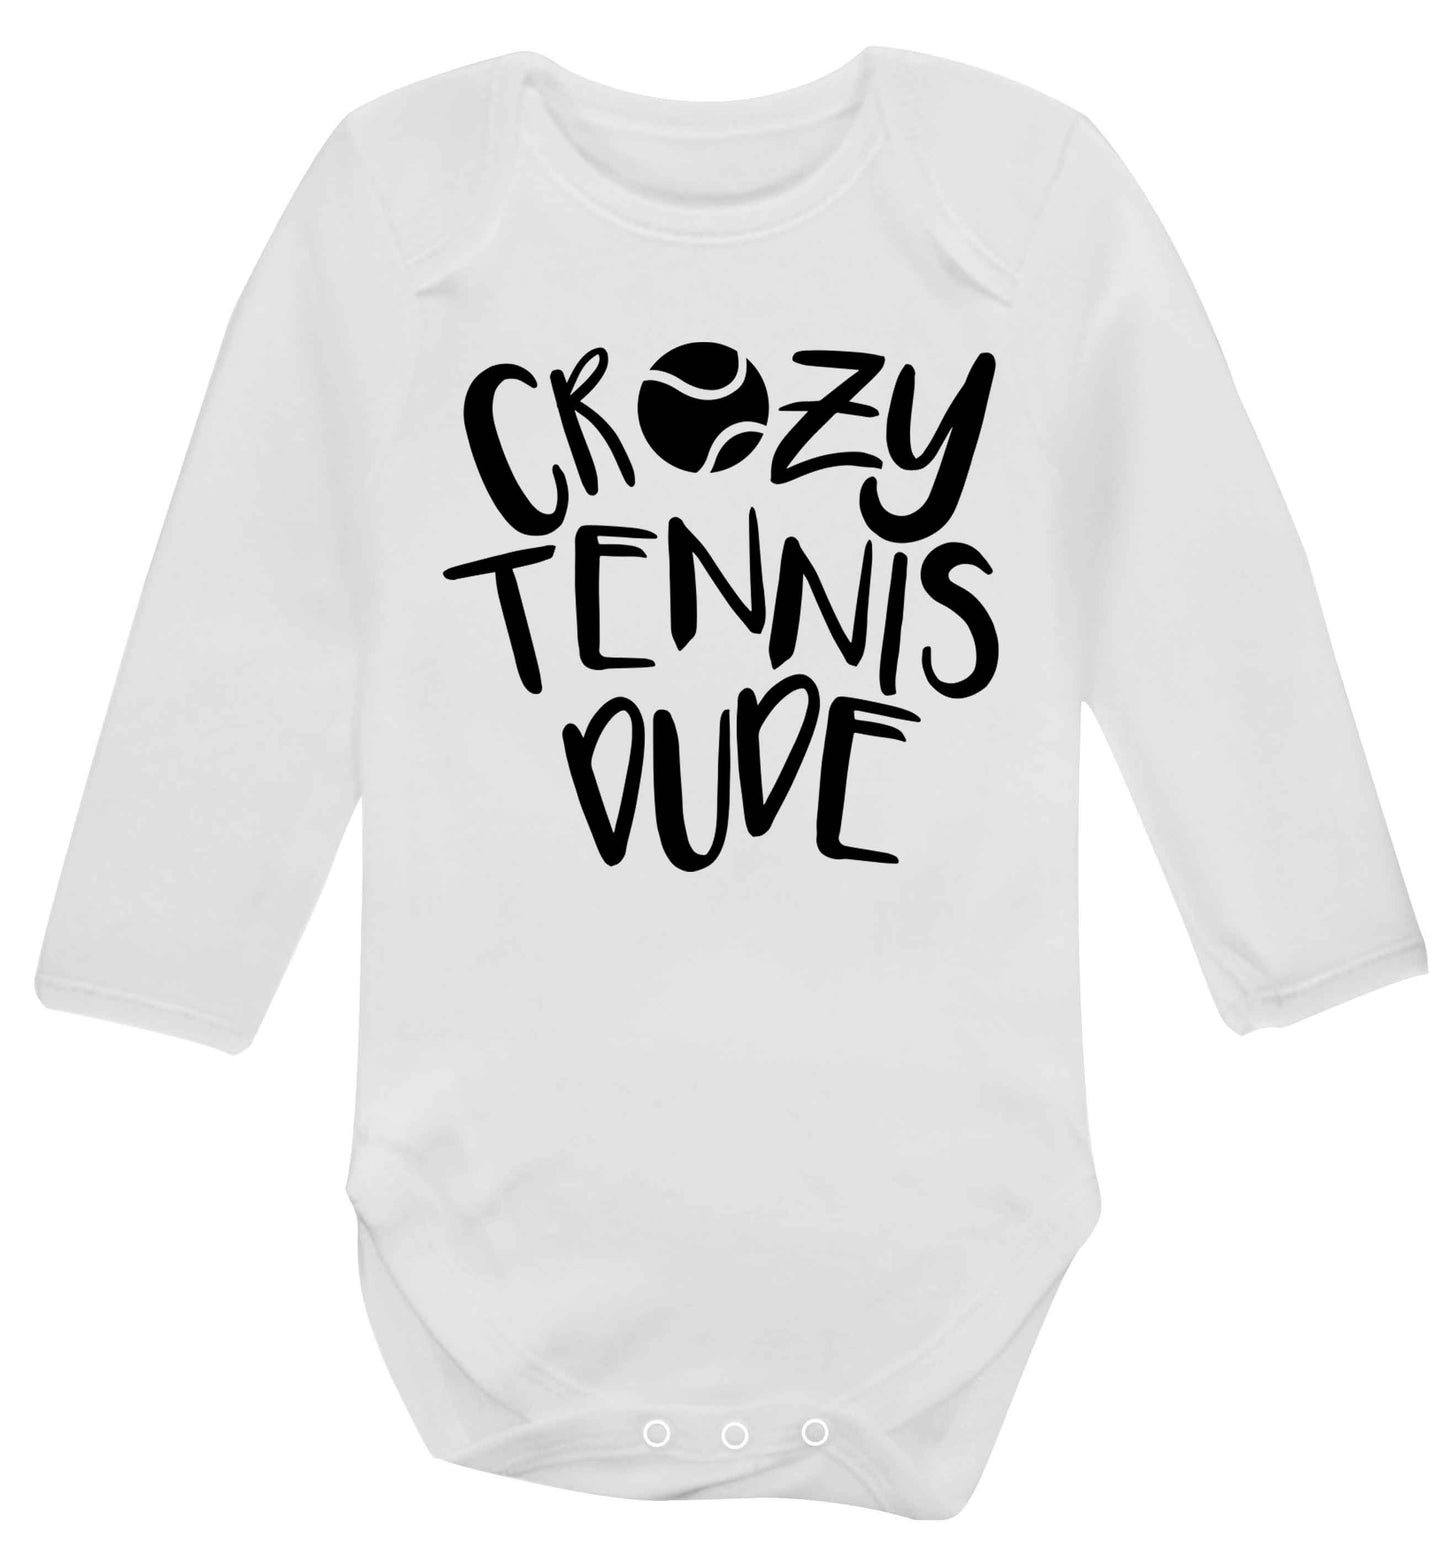 Crazy tennis dude Baby Vest long sleeved white 6-12 months